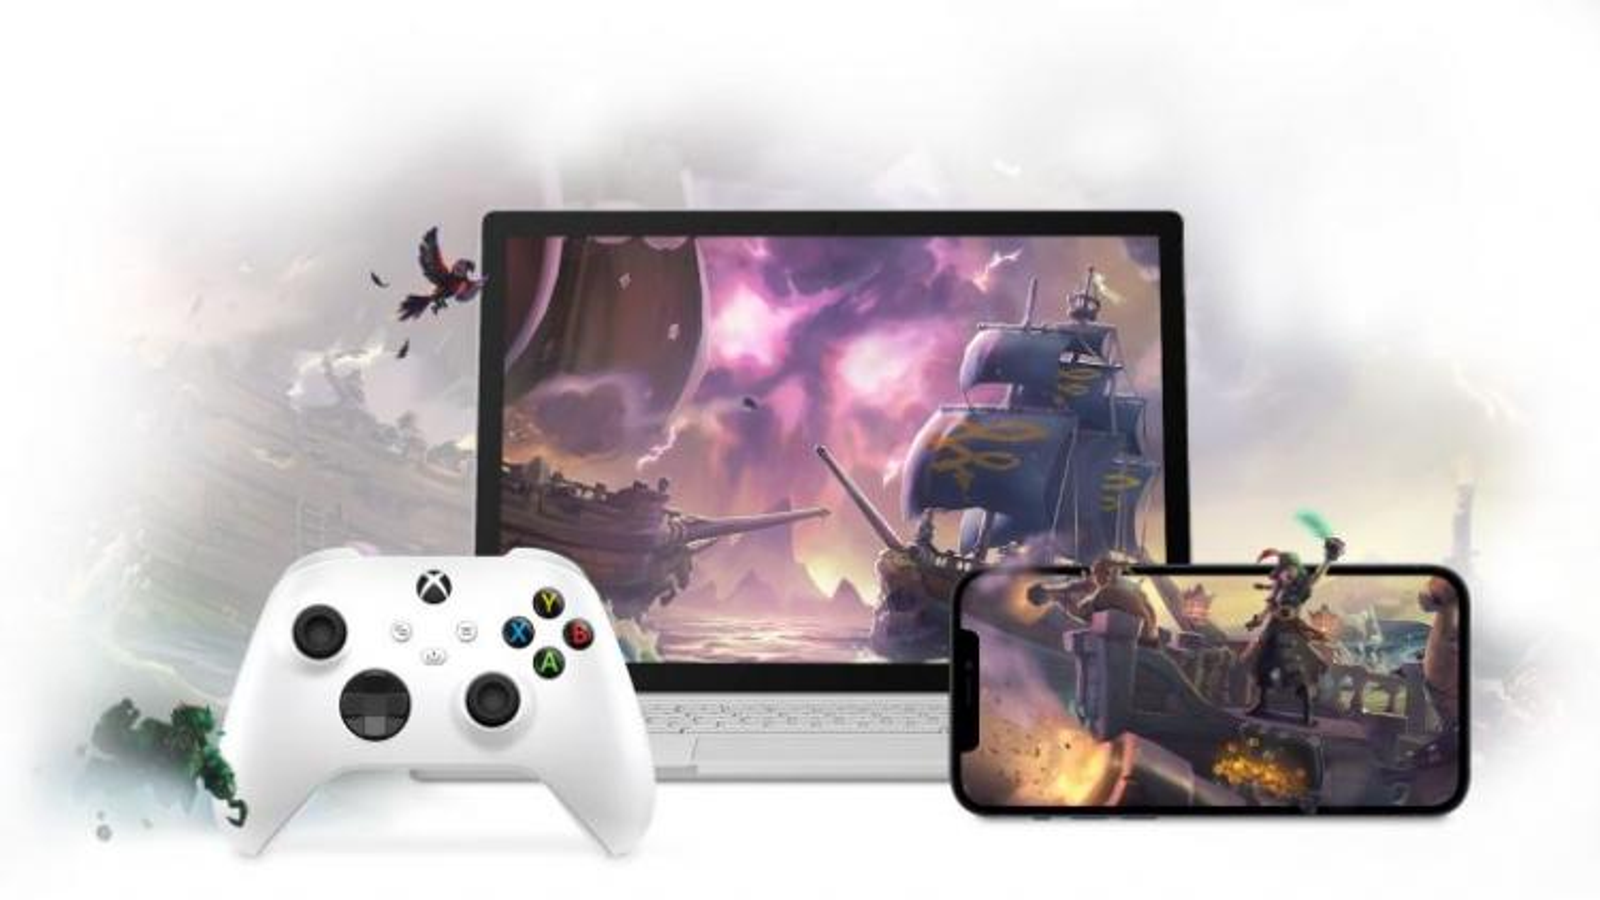 Microsoft Xbox Cloud Gaming For Android & iOS Now Available In 26  Countries: Here Is The Complete List